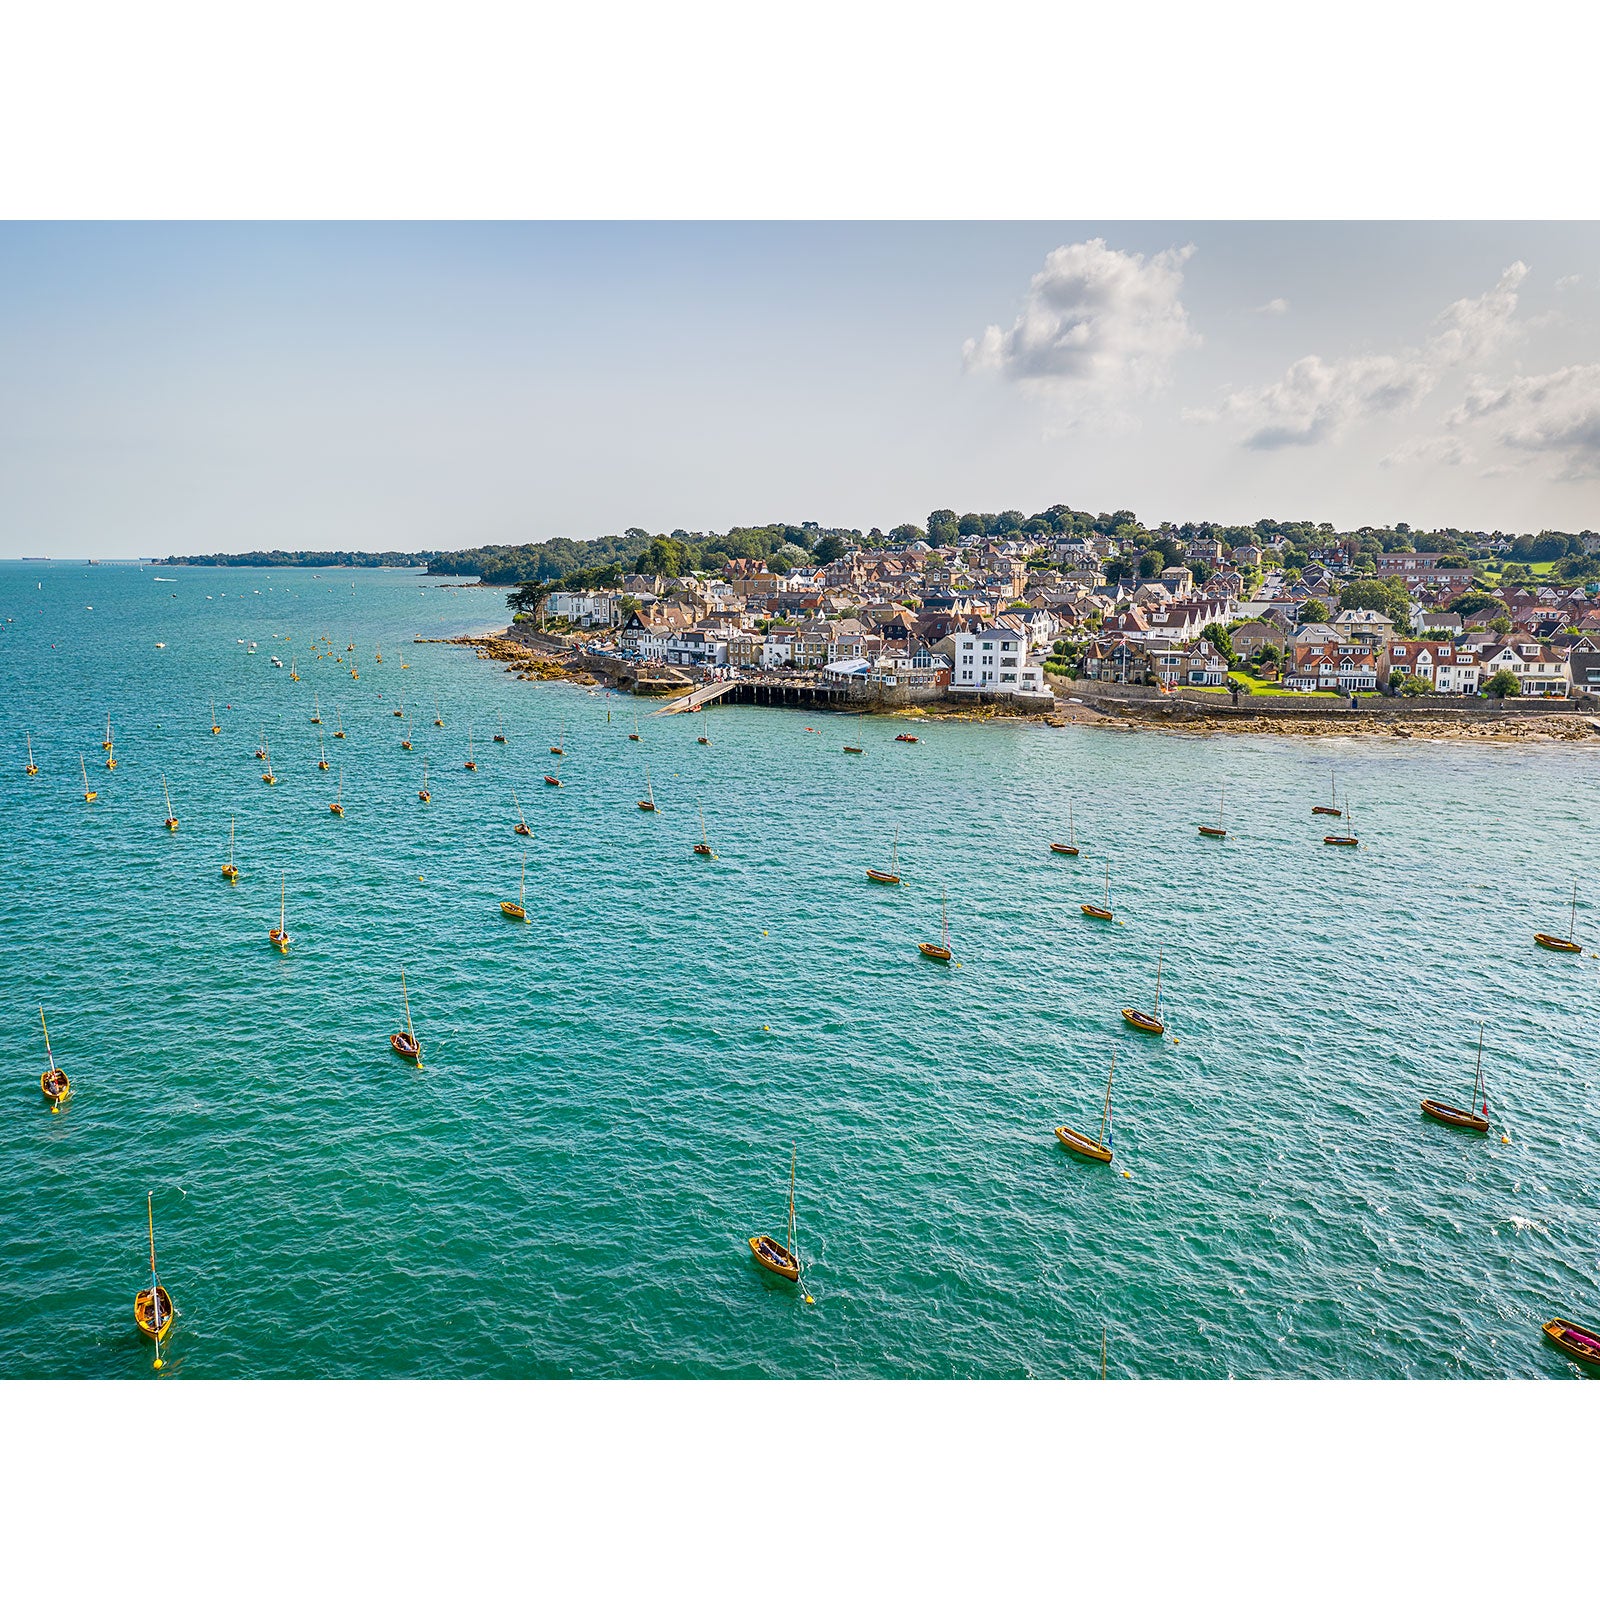 Aerial view of a coastal town on the Isle of Wight with moored boats and clear blue waters captured by Seaview from Available Light Photography.